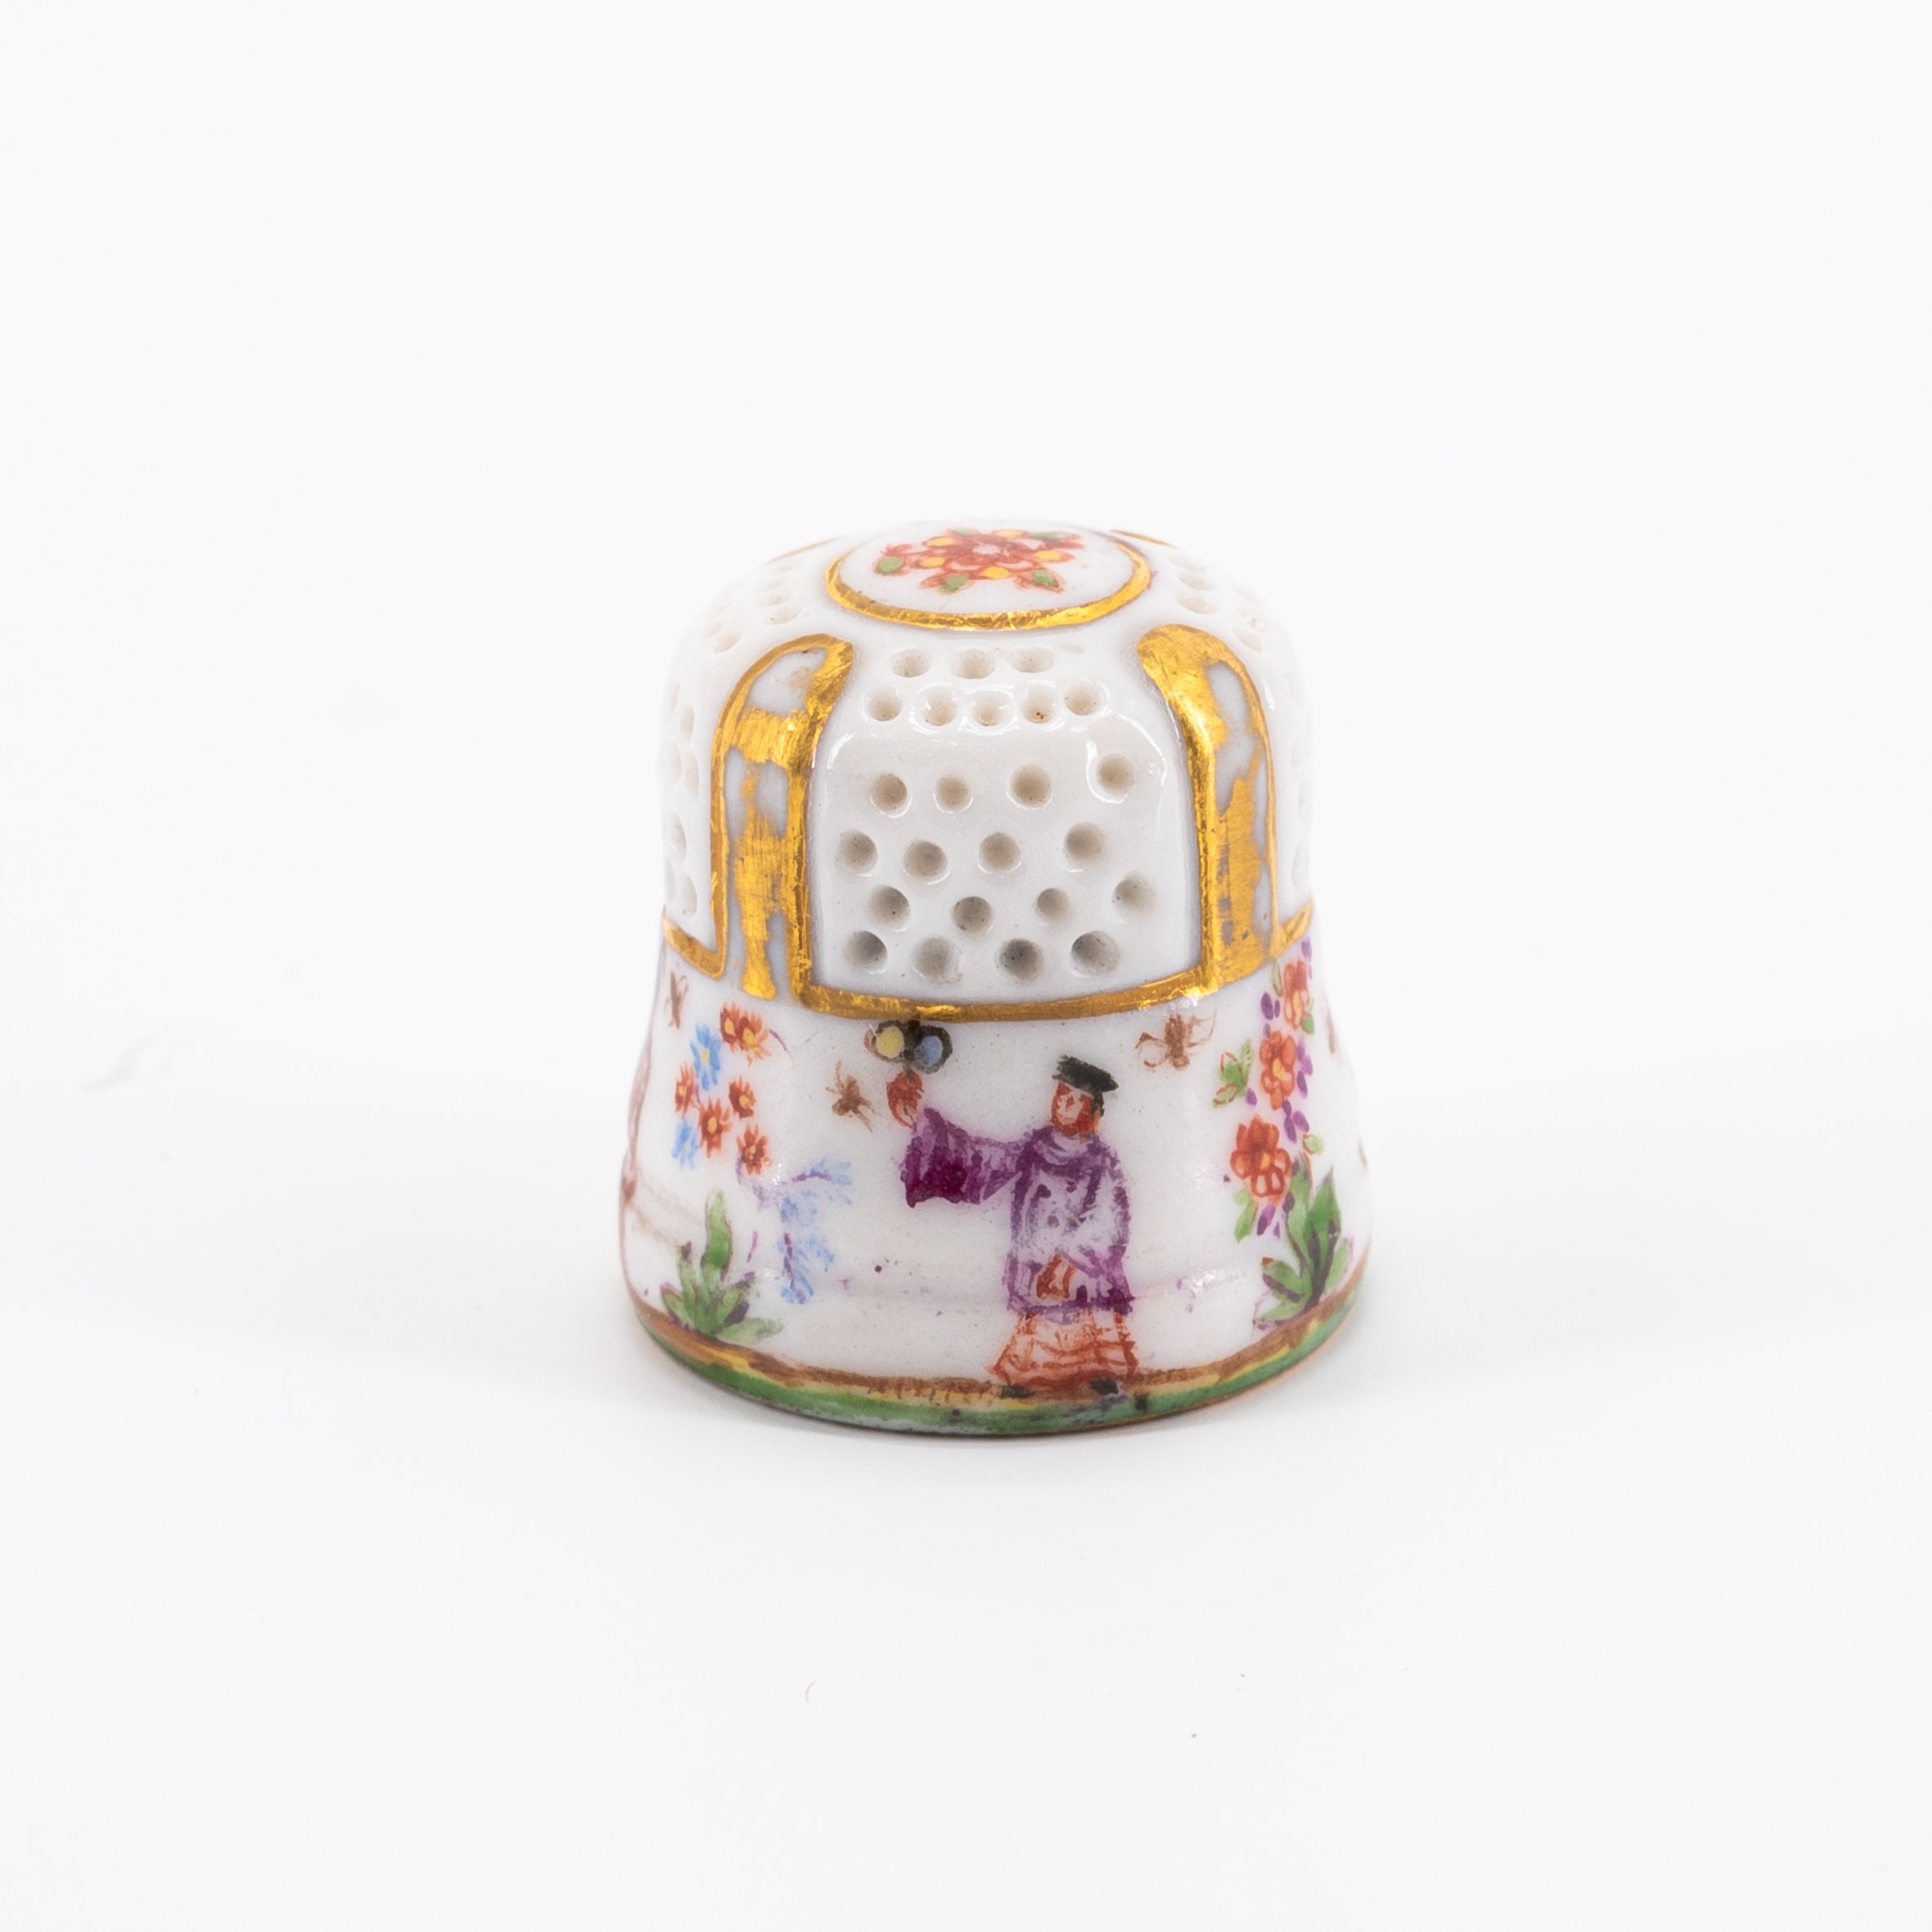 RARE PORCELAIN THIMBLE WITH VERY FINELY COLOURED CHINOISERIES - Image 4 of 6